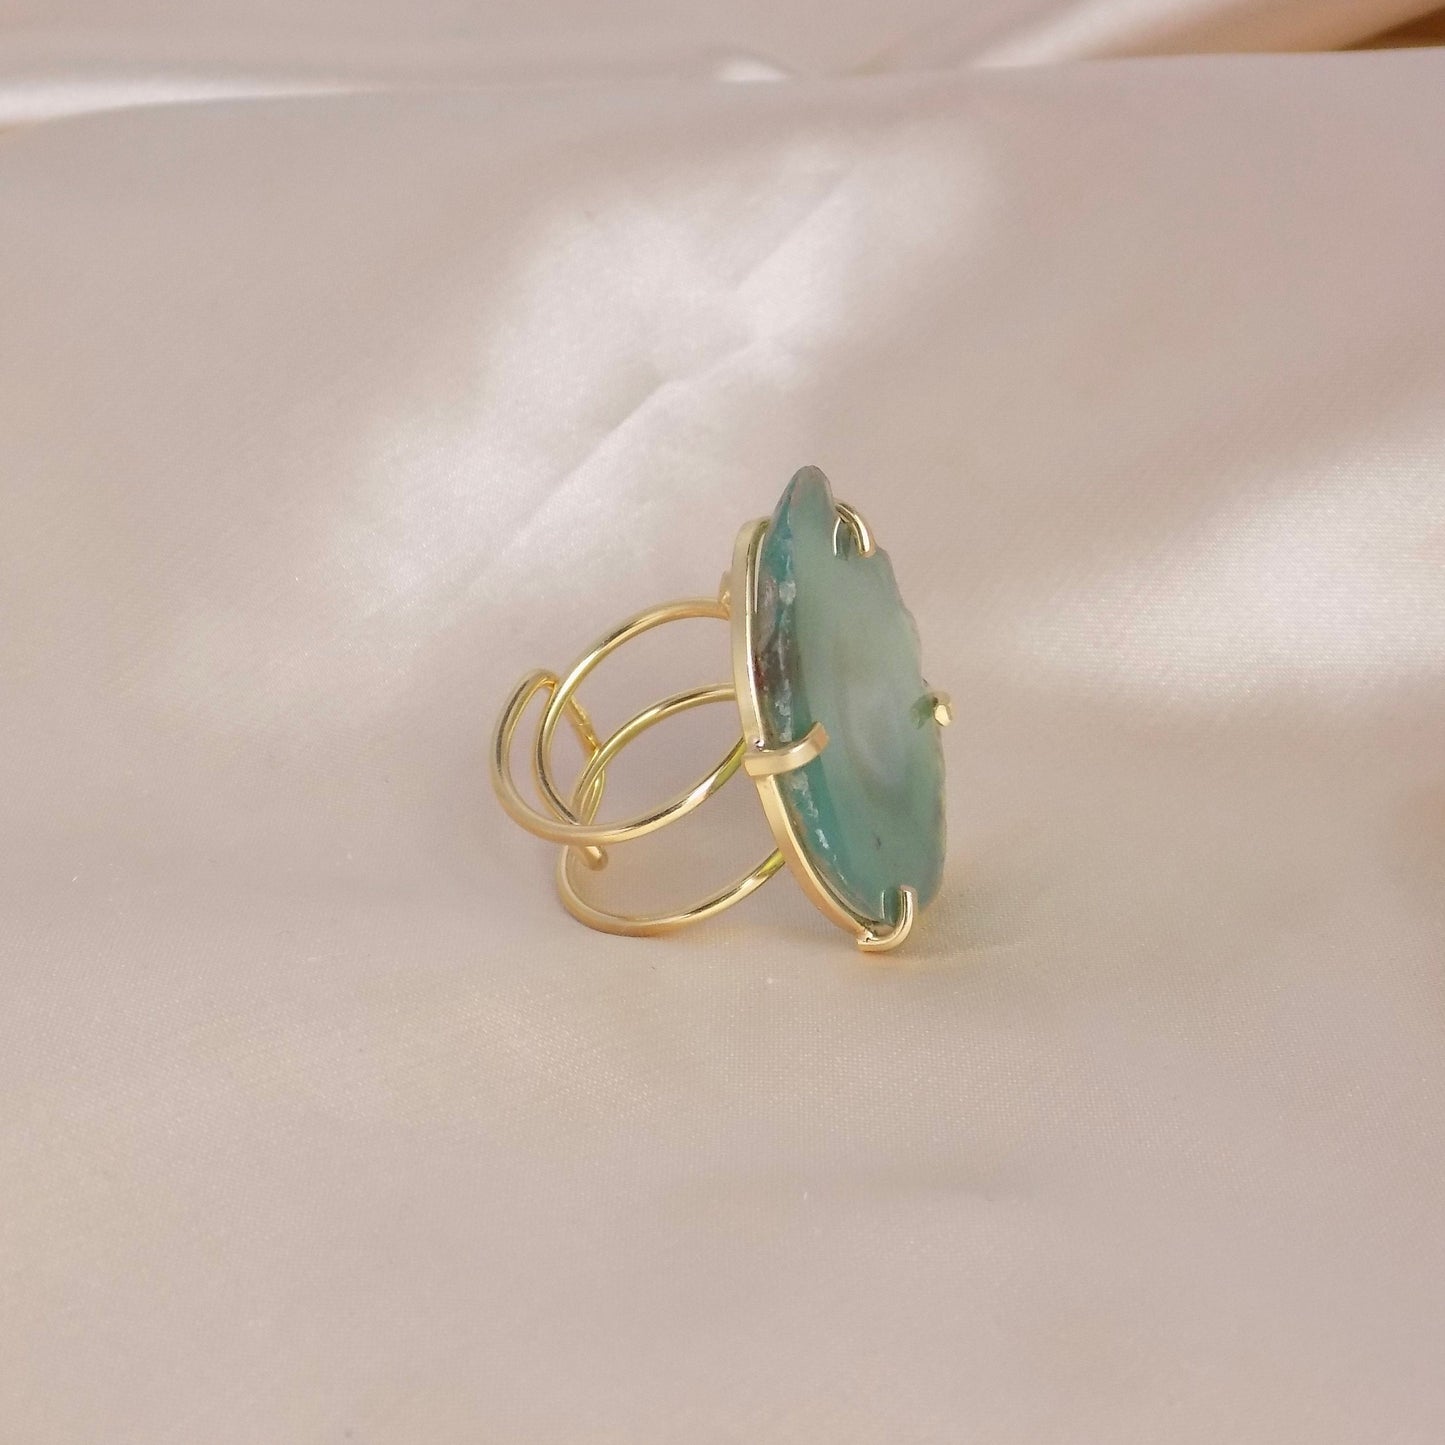 Boho Green Agate Gemstone Ring Gold Plated Adjustable, Mothers Day Gift, G14-724